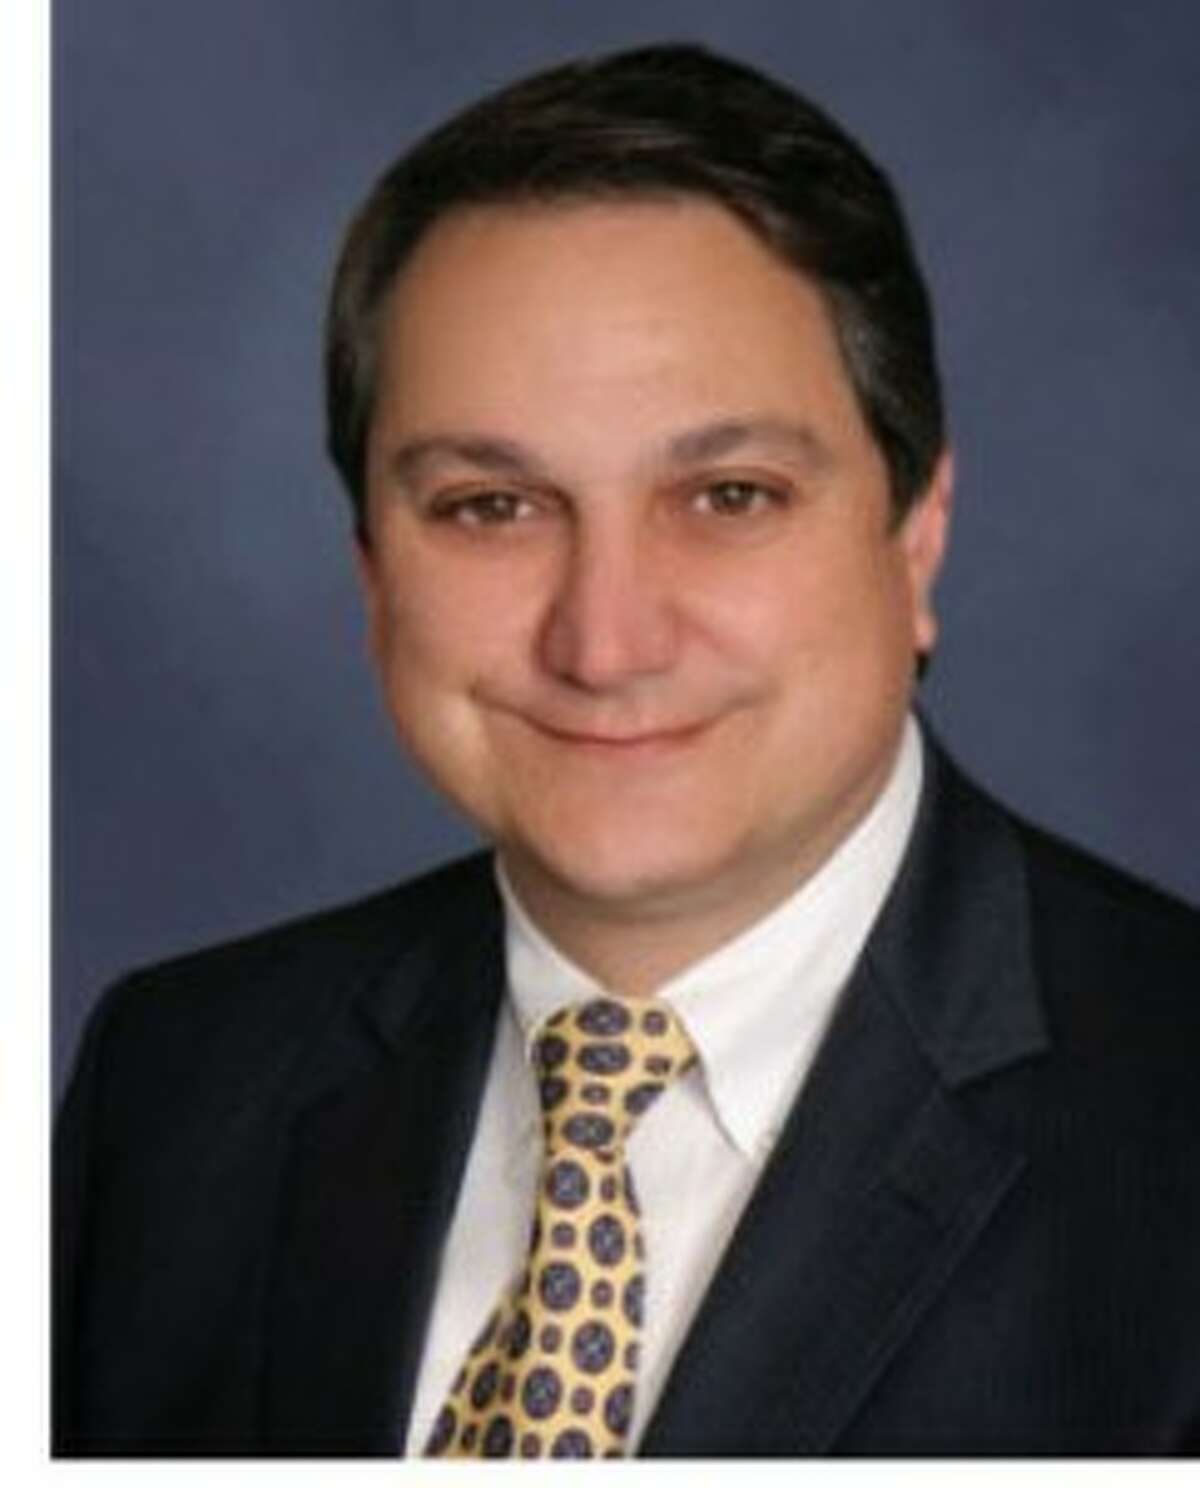 Steve Munisteri, former chairman of the Republican Party of Texas, is set to leave the White House Feb. 8 and join the 2020 reelection campaign of U.S. Sen. John Cornyn.